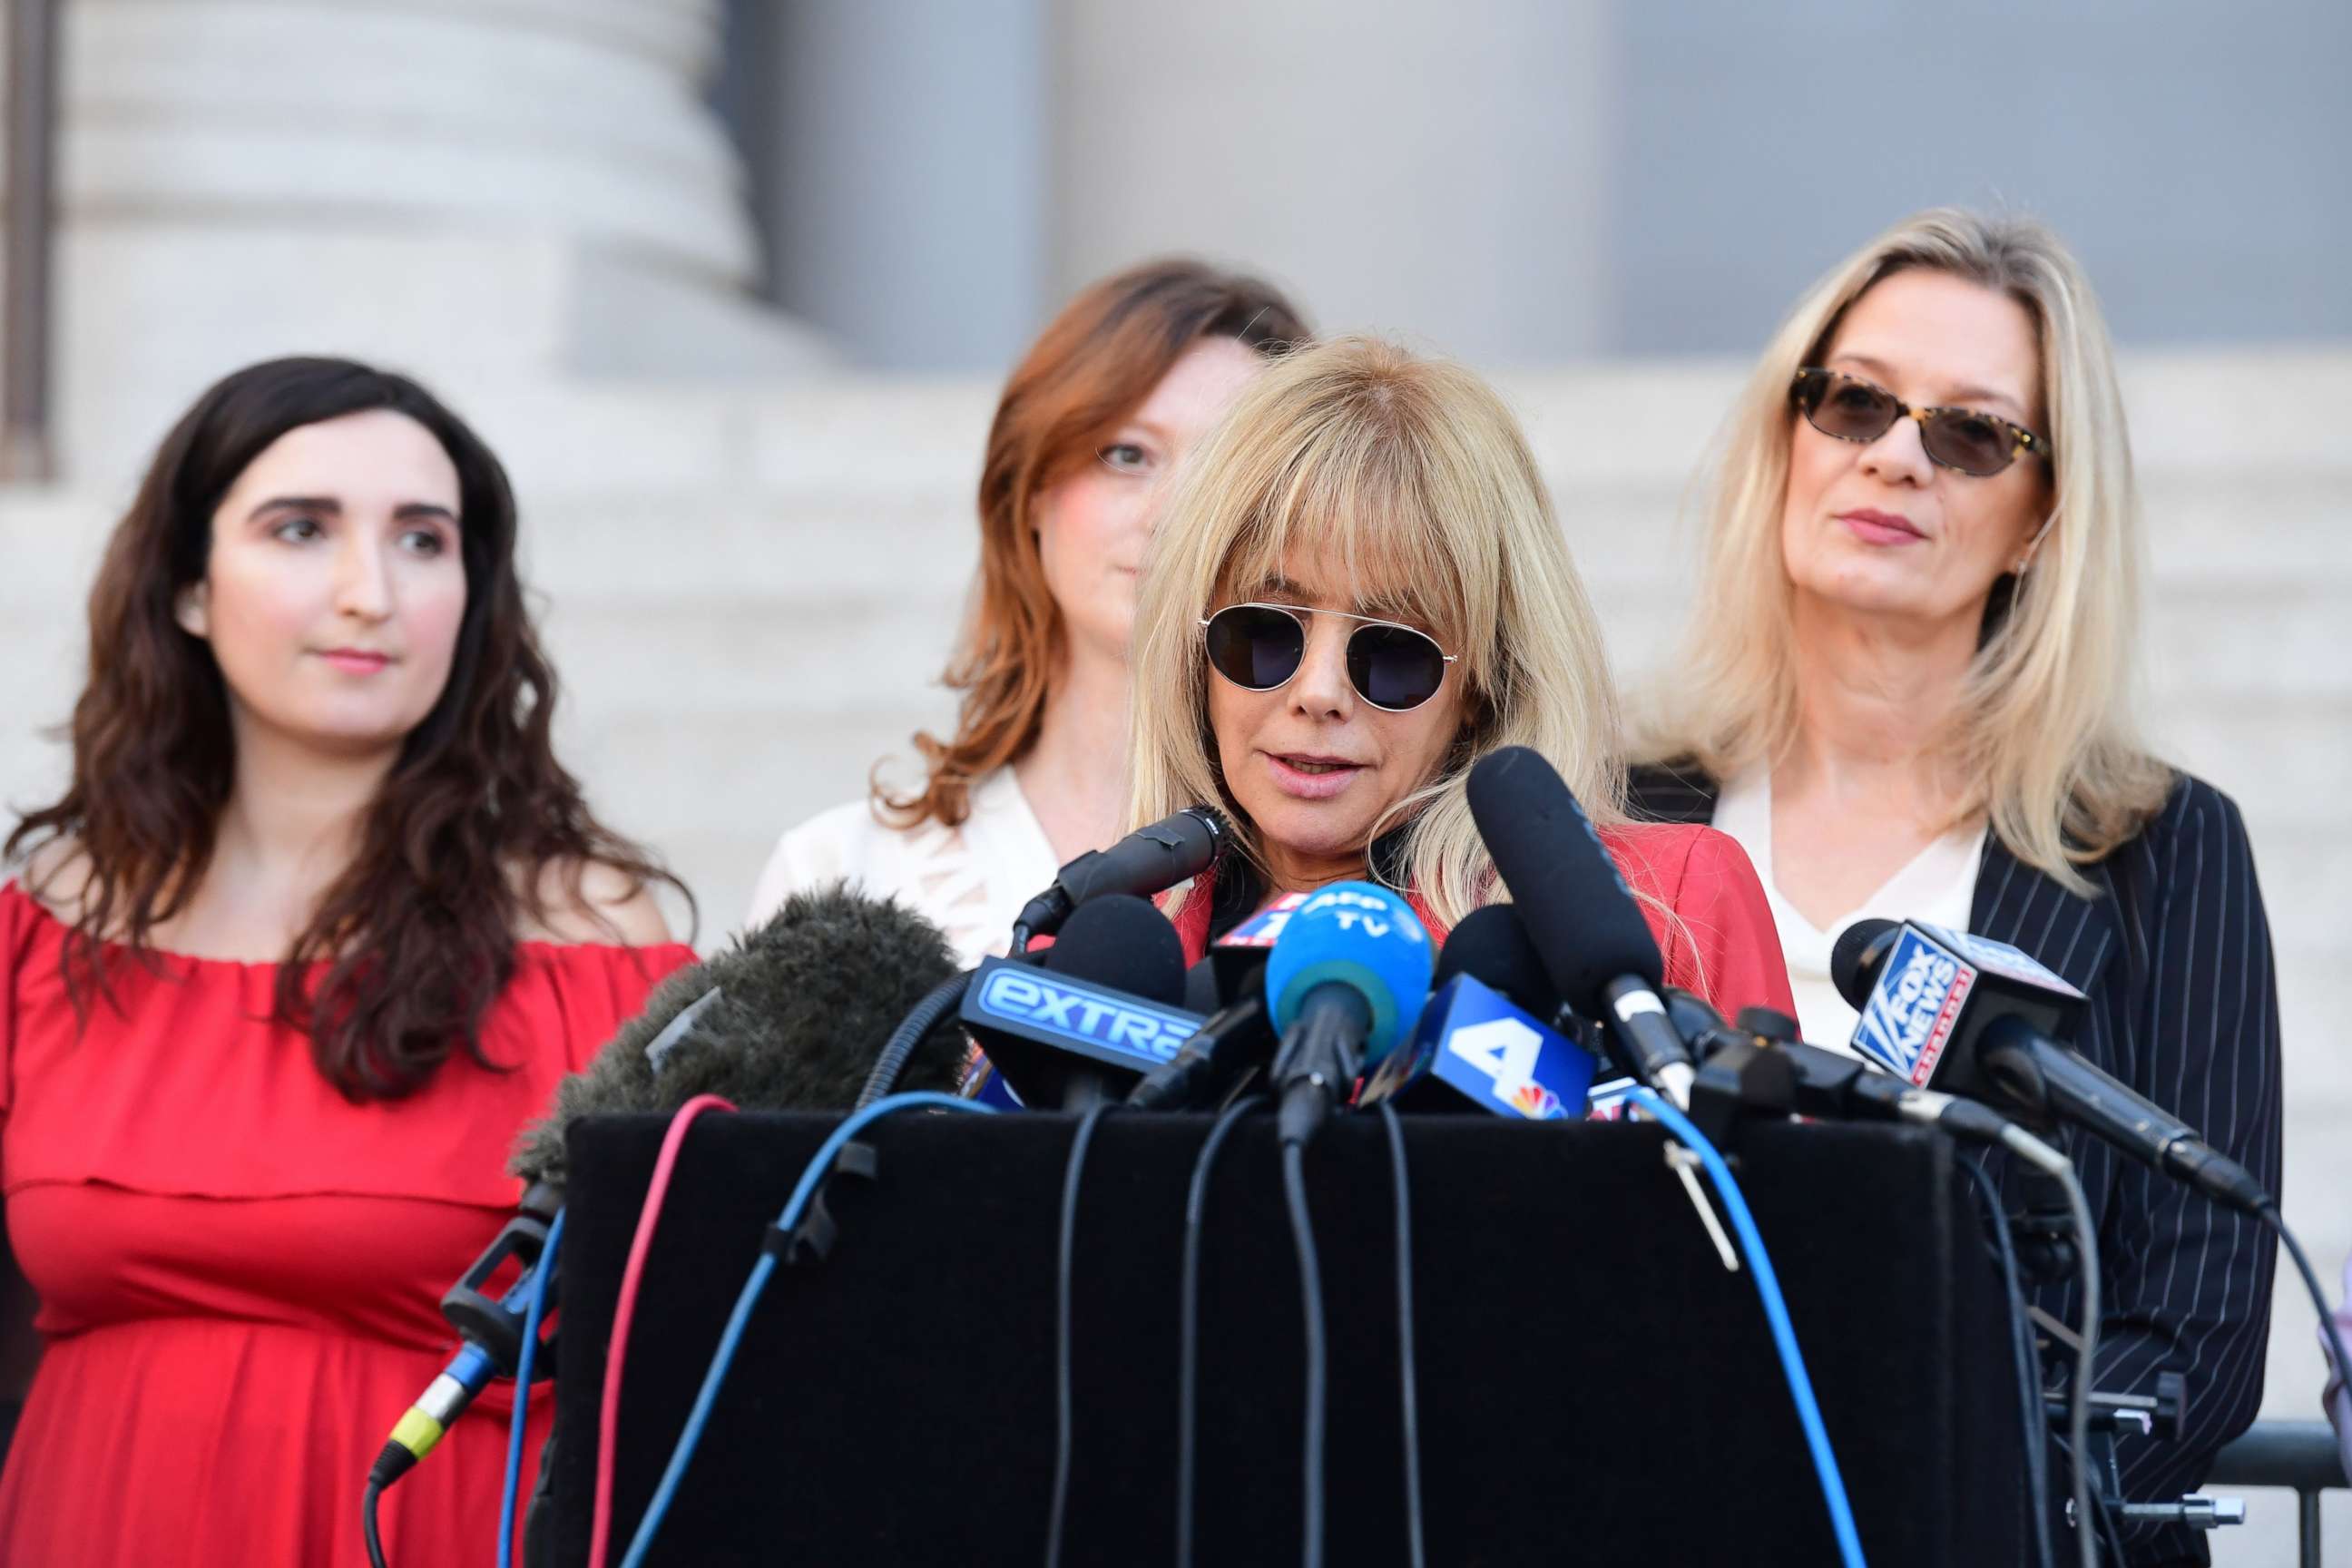 PHOTO: Actress Rosanna Arquette speaks alongside a group of Silence Breakers about Harvey Weinsteins sexual misconduct, during a press conference following Weinstein's guilty verdict on Feb. 25, 2020, in Los Angeles.